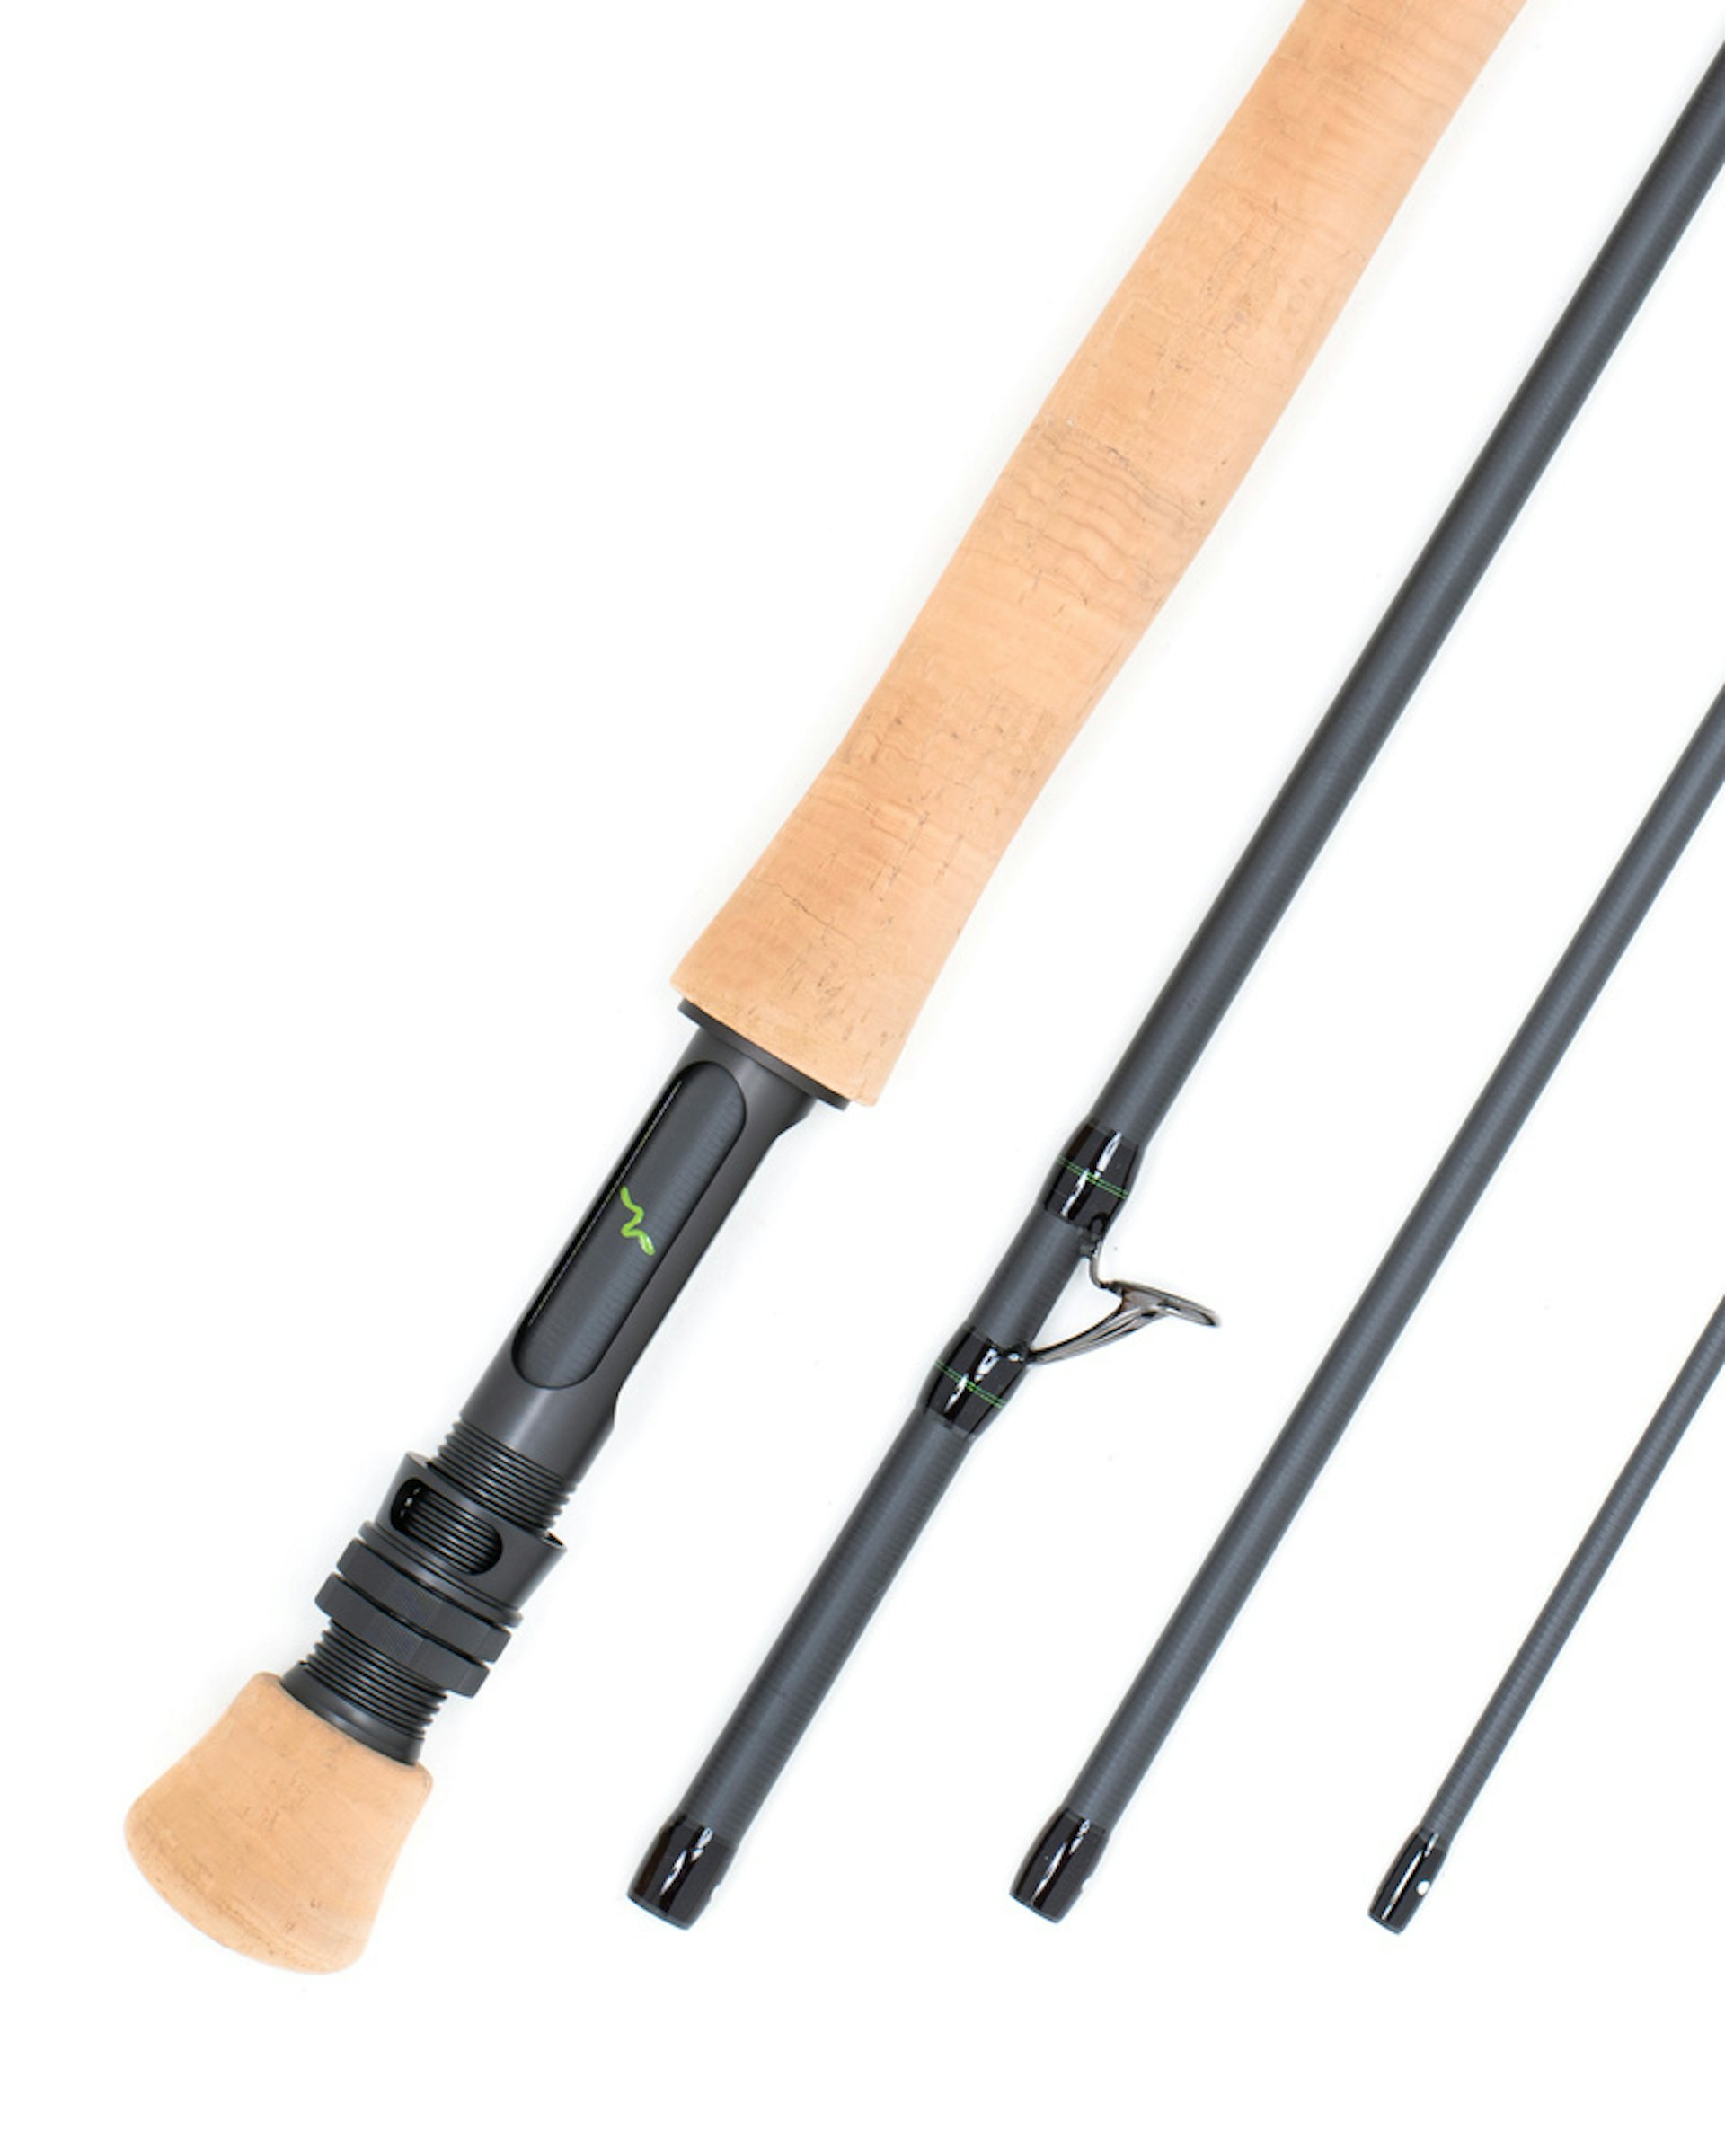 Single Hand Fly Rods - Fly fishing - Trout fly fishing